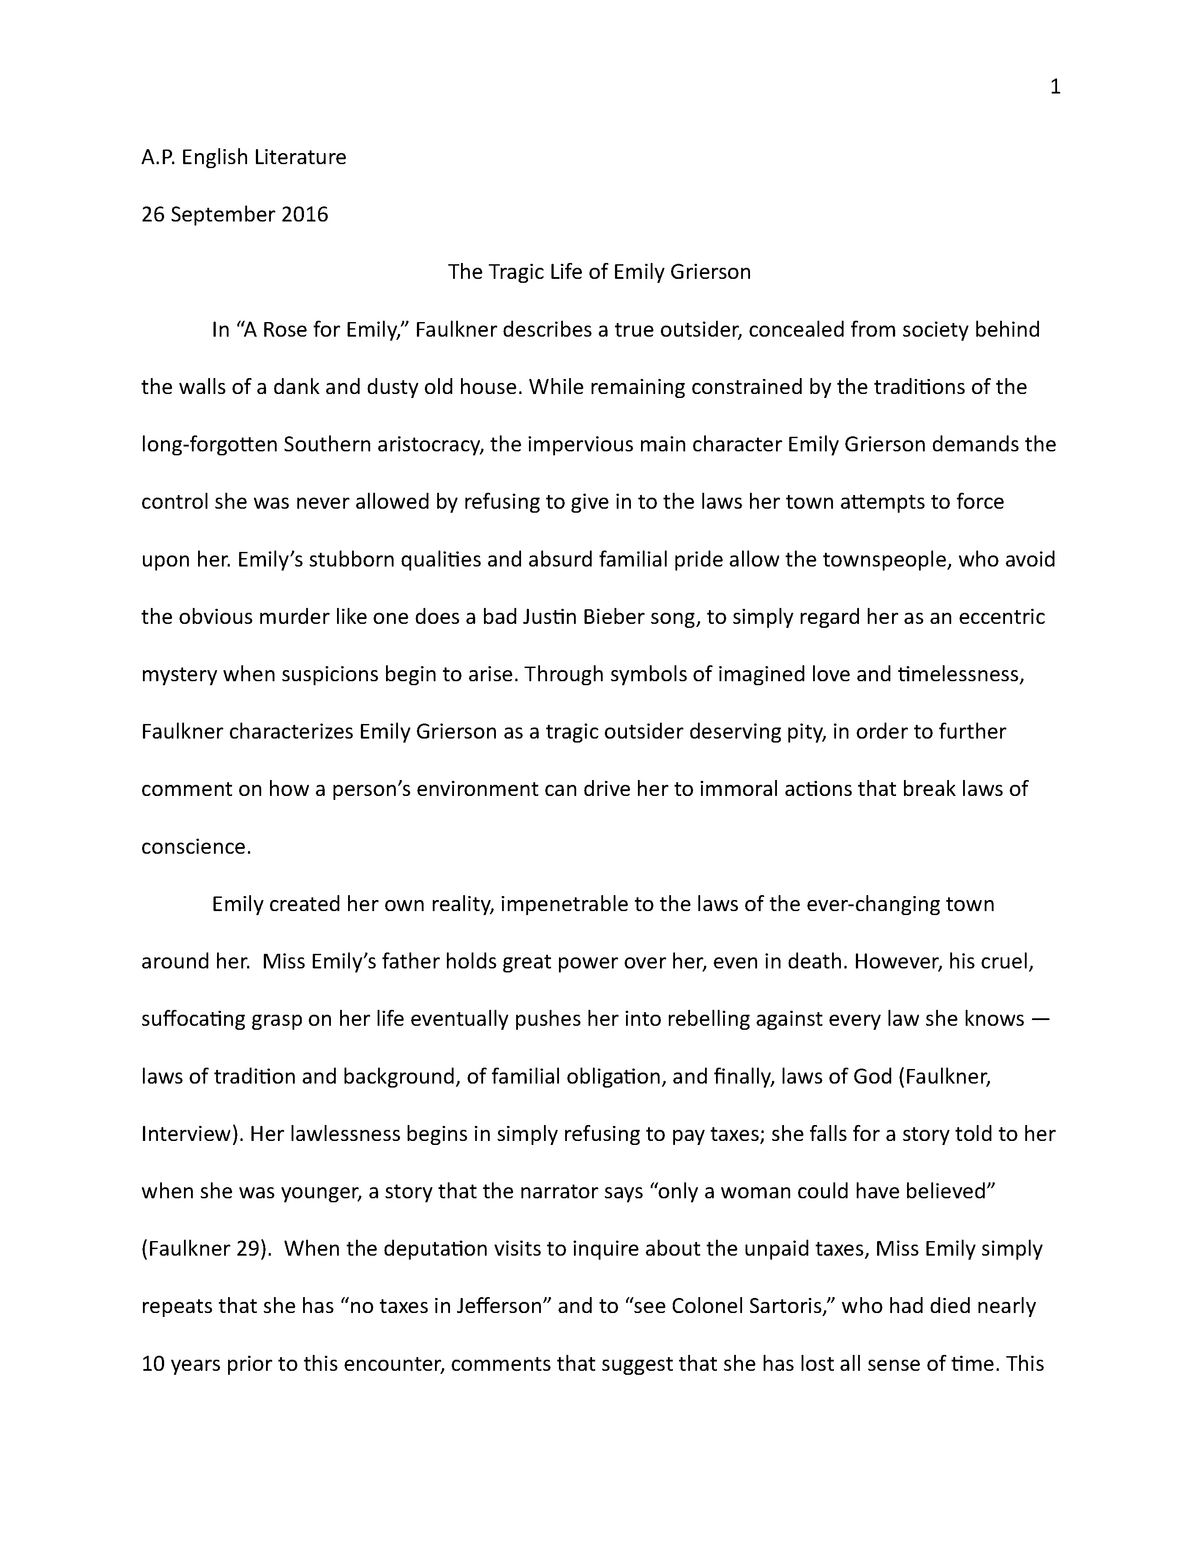 literary analysis essay on a rose for emily